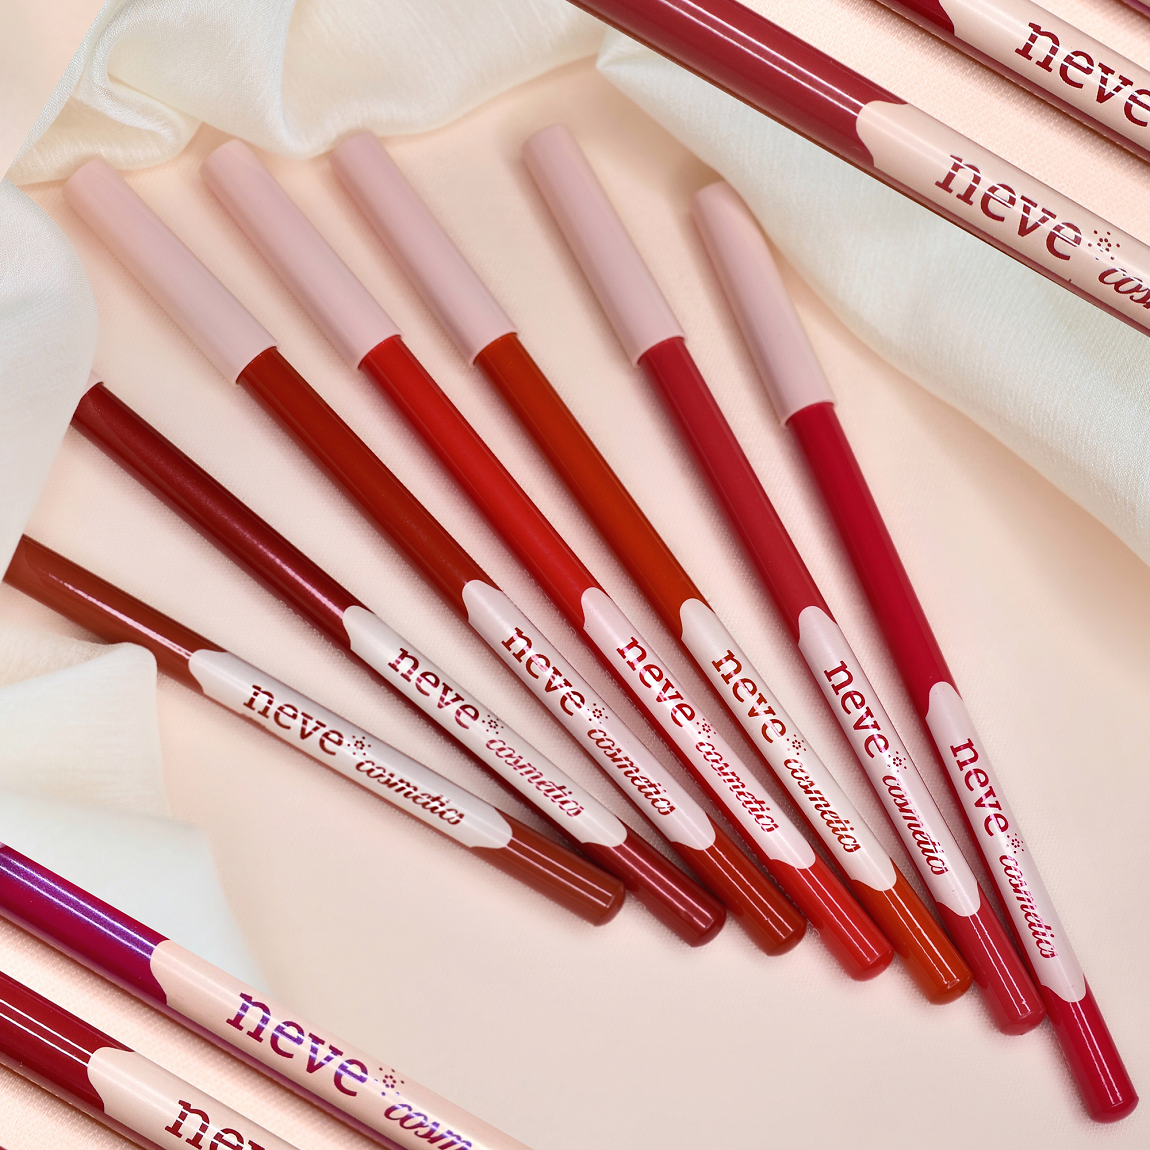 What are lip pencils and what are they for?